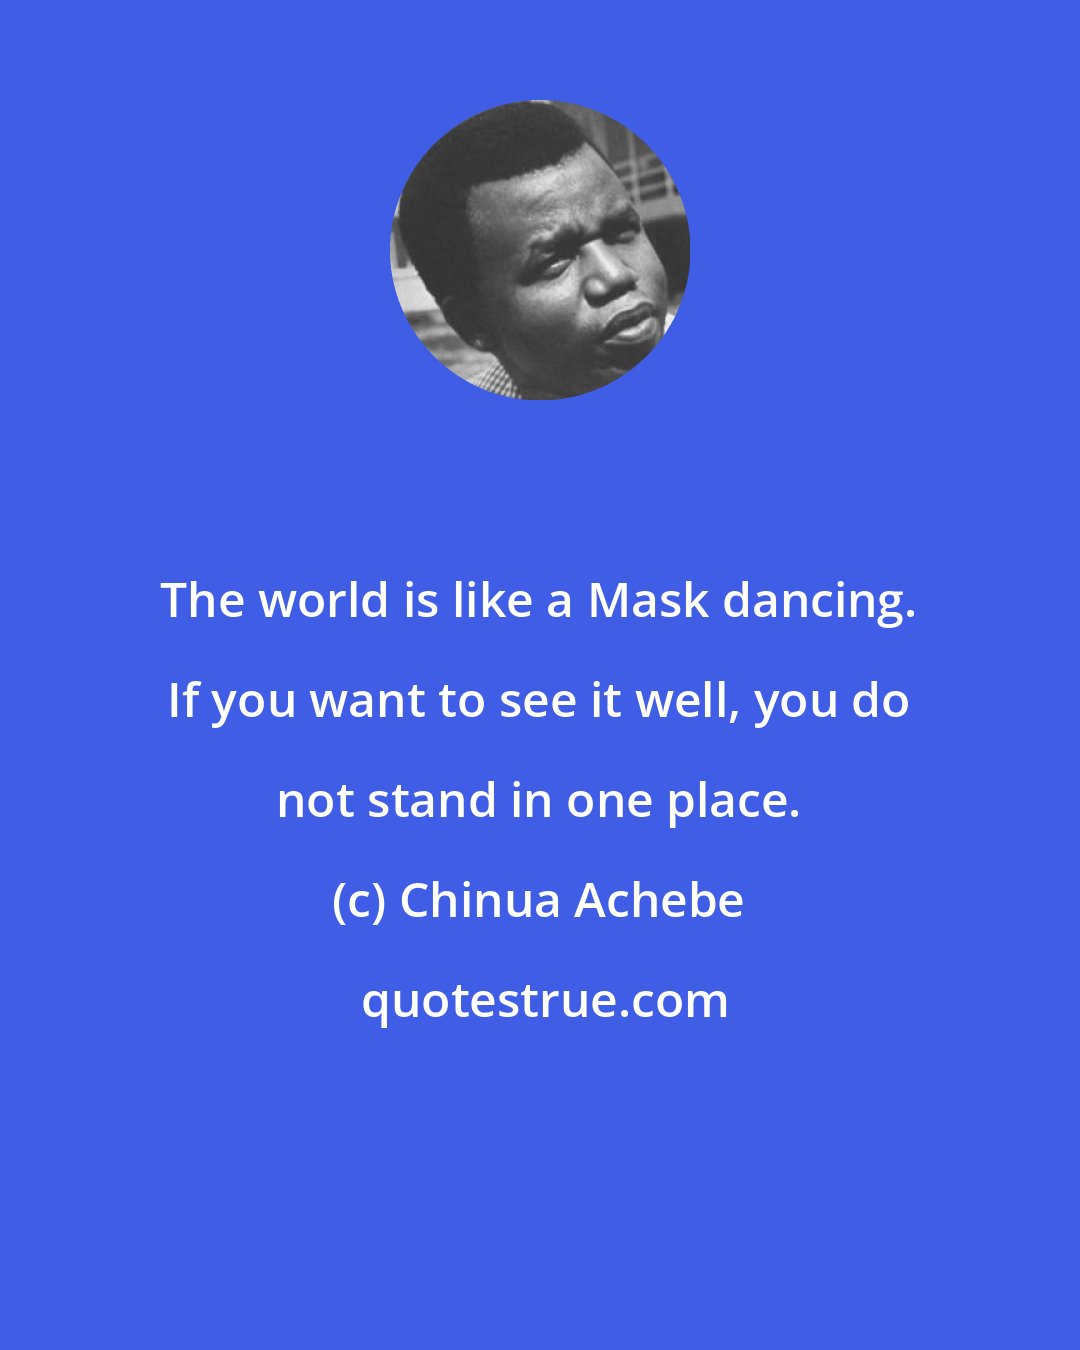 Chinua Achebe: The world is like a Mask dancing. If you want to see it well, you do not stand in one place.